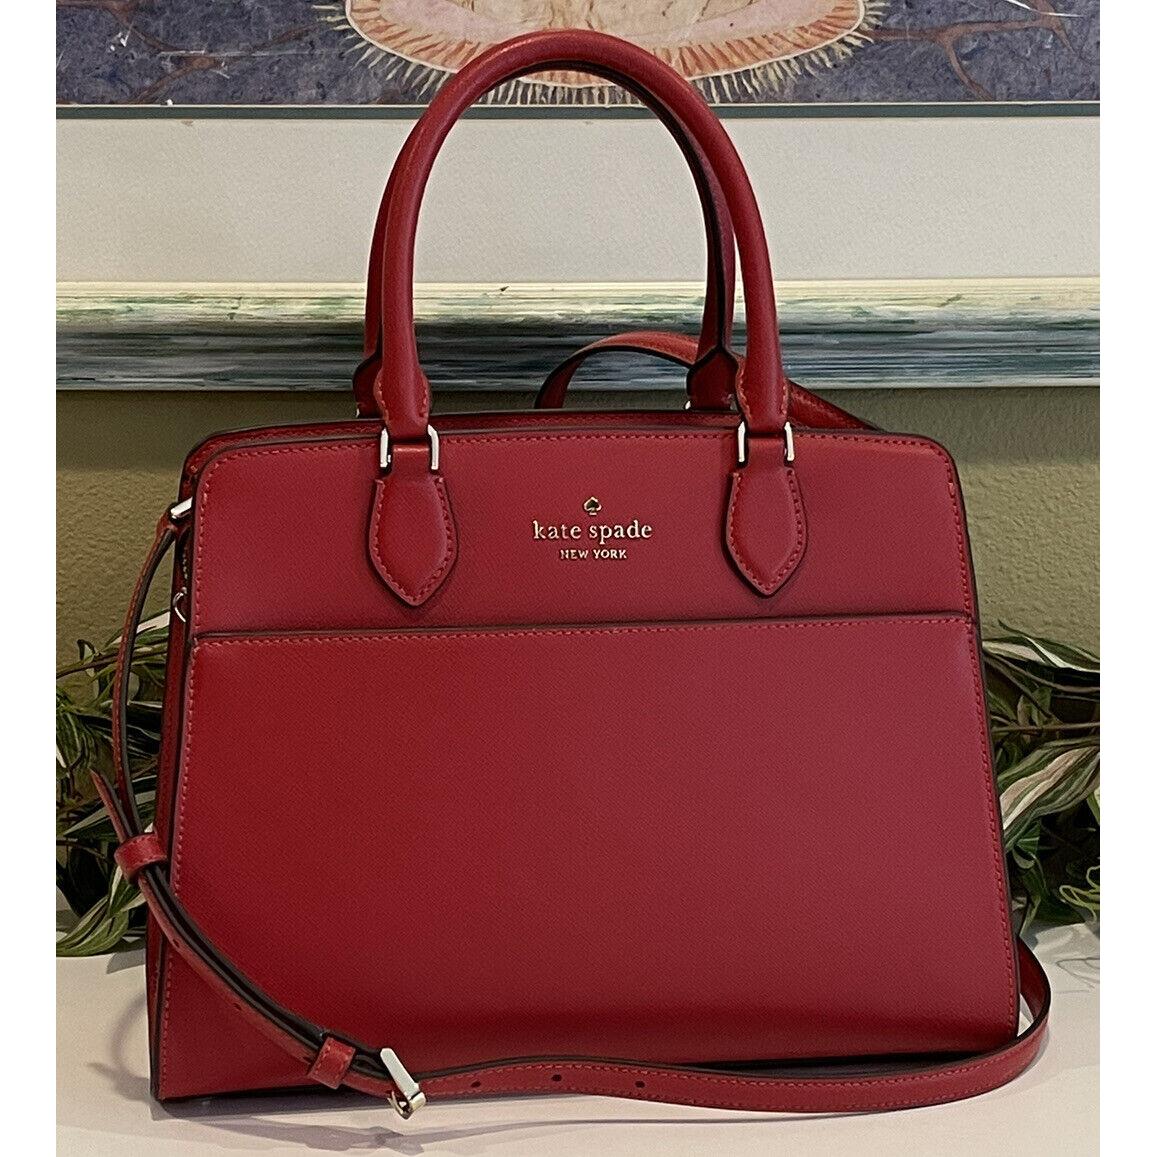 KATE SPADE MADISON MEDIUM SATCHEL SHOULDER BAG TOTE RED CANDIED CHERRY  LEATHER